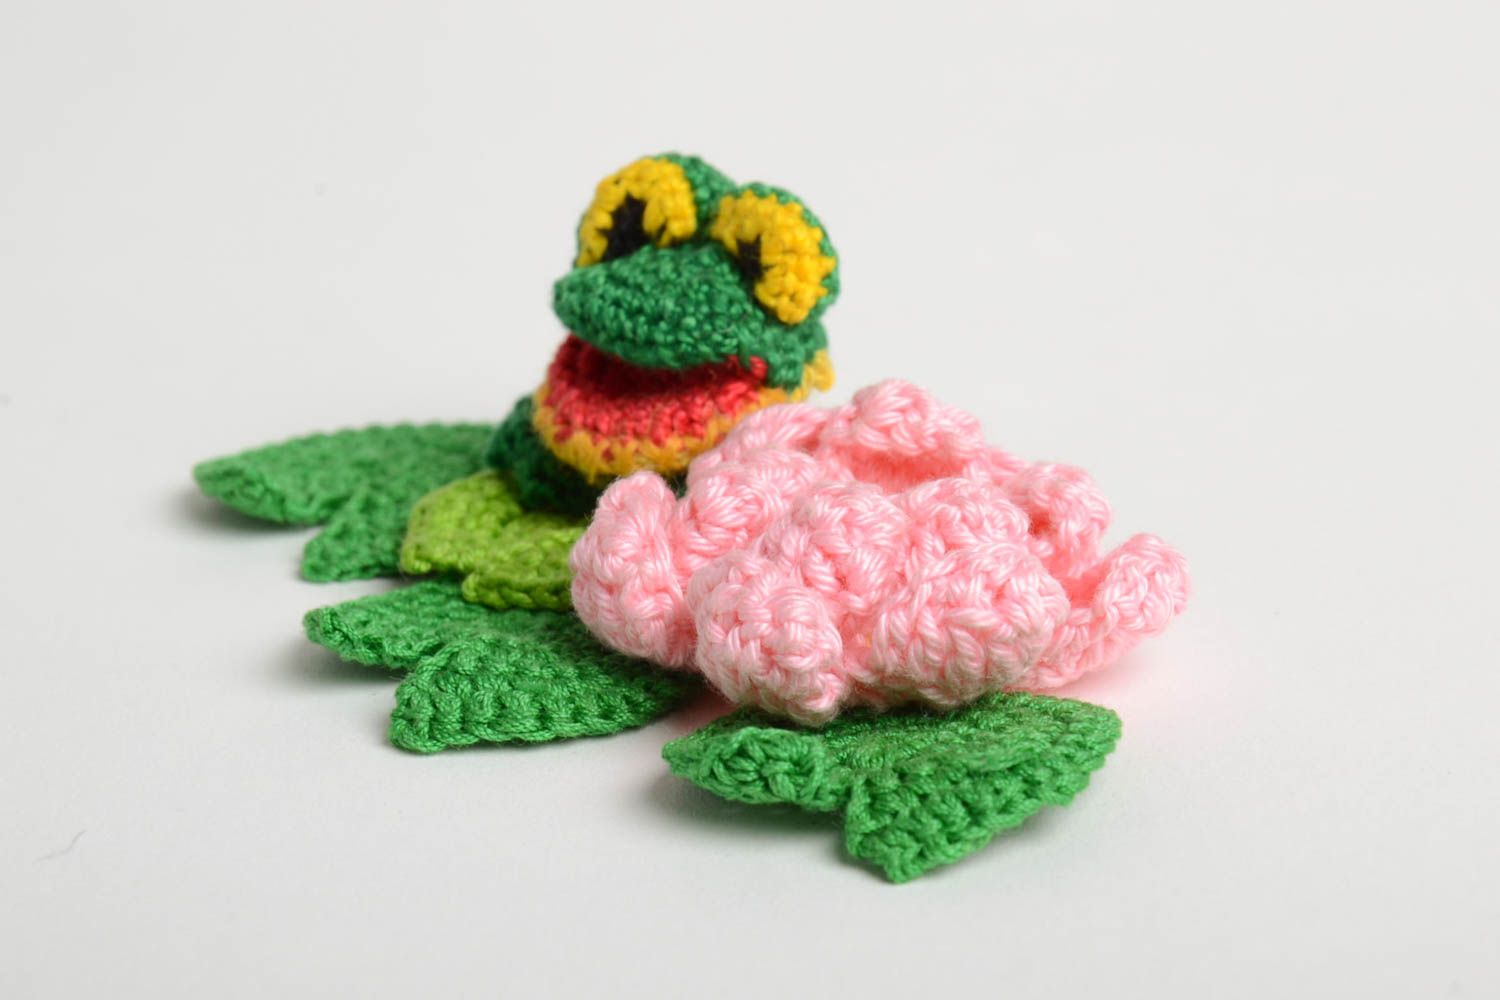 Handmade toy designer toy animal toy crocheted toy unusual gift baby toy photo 4